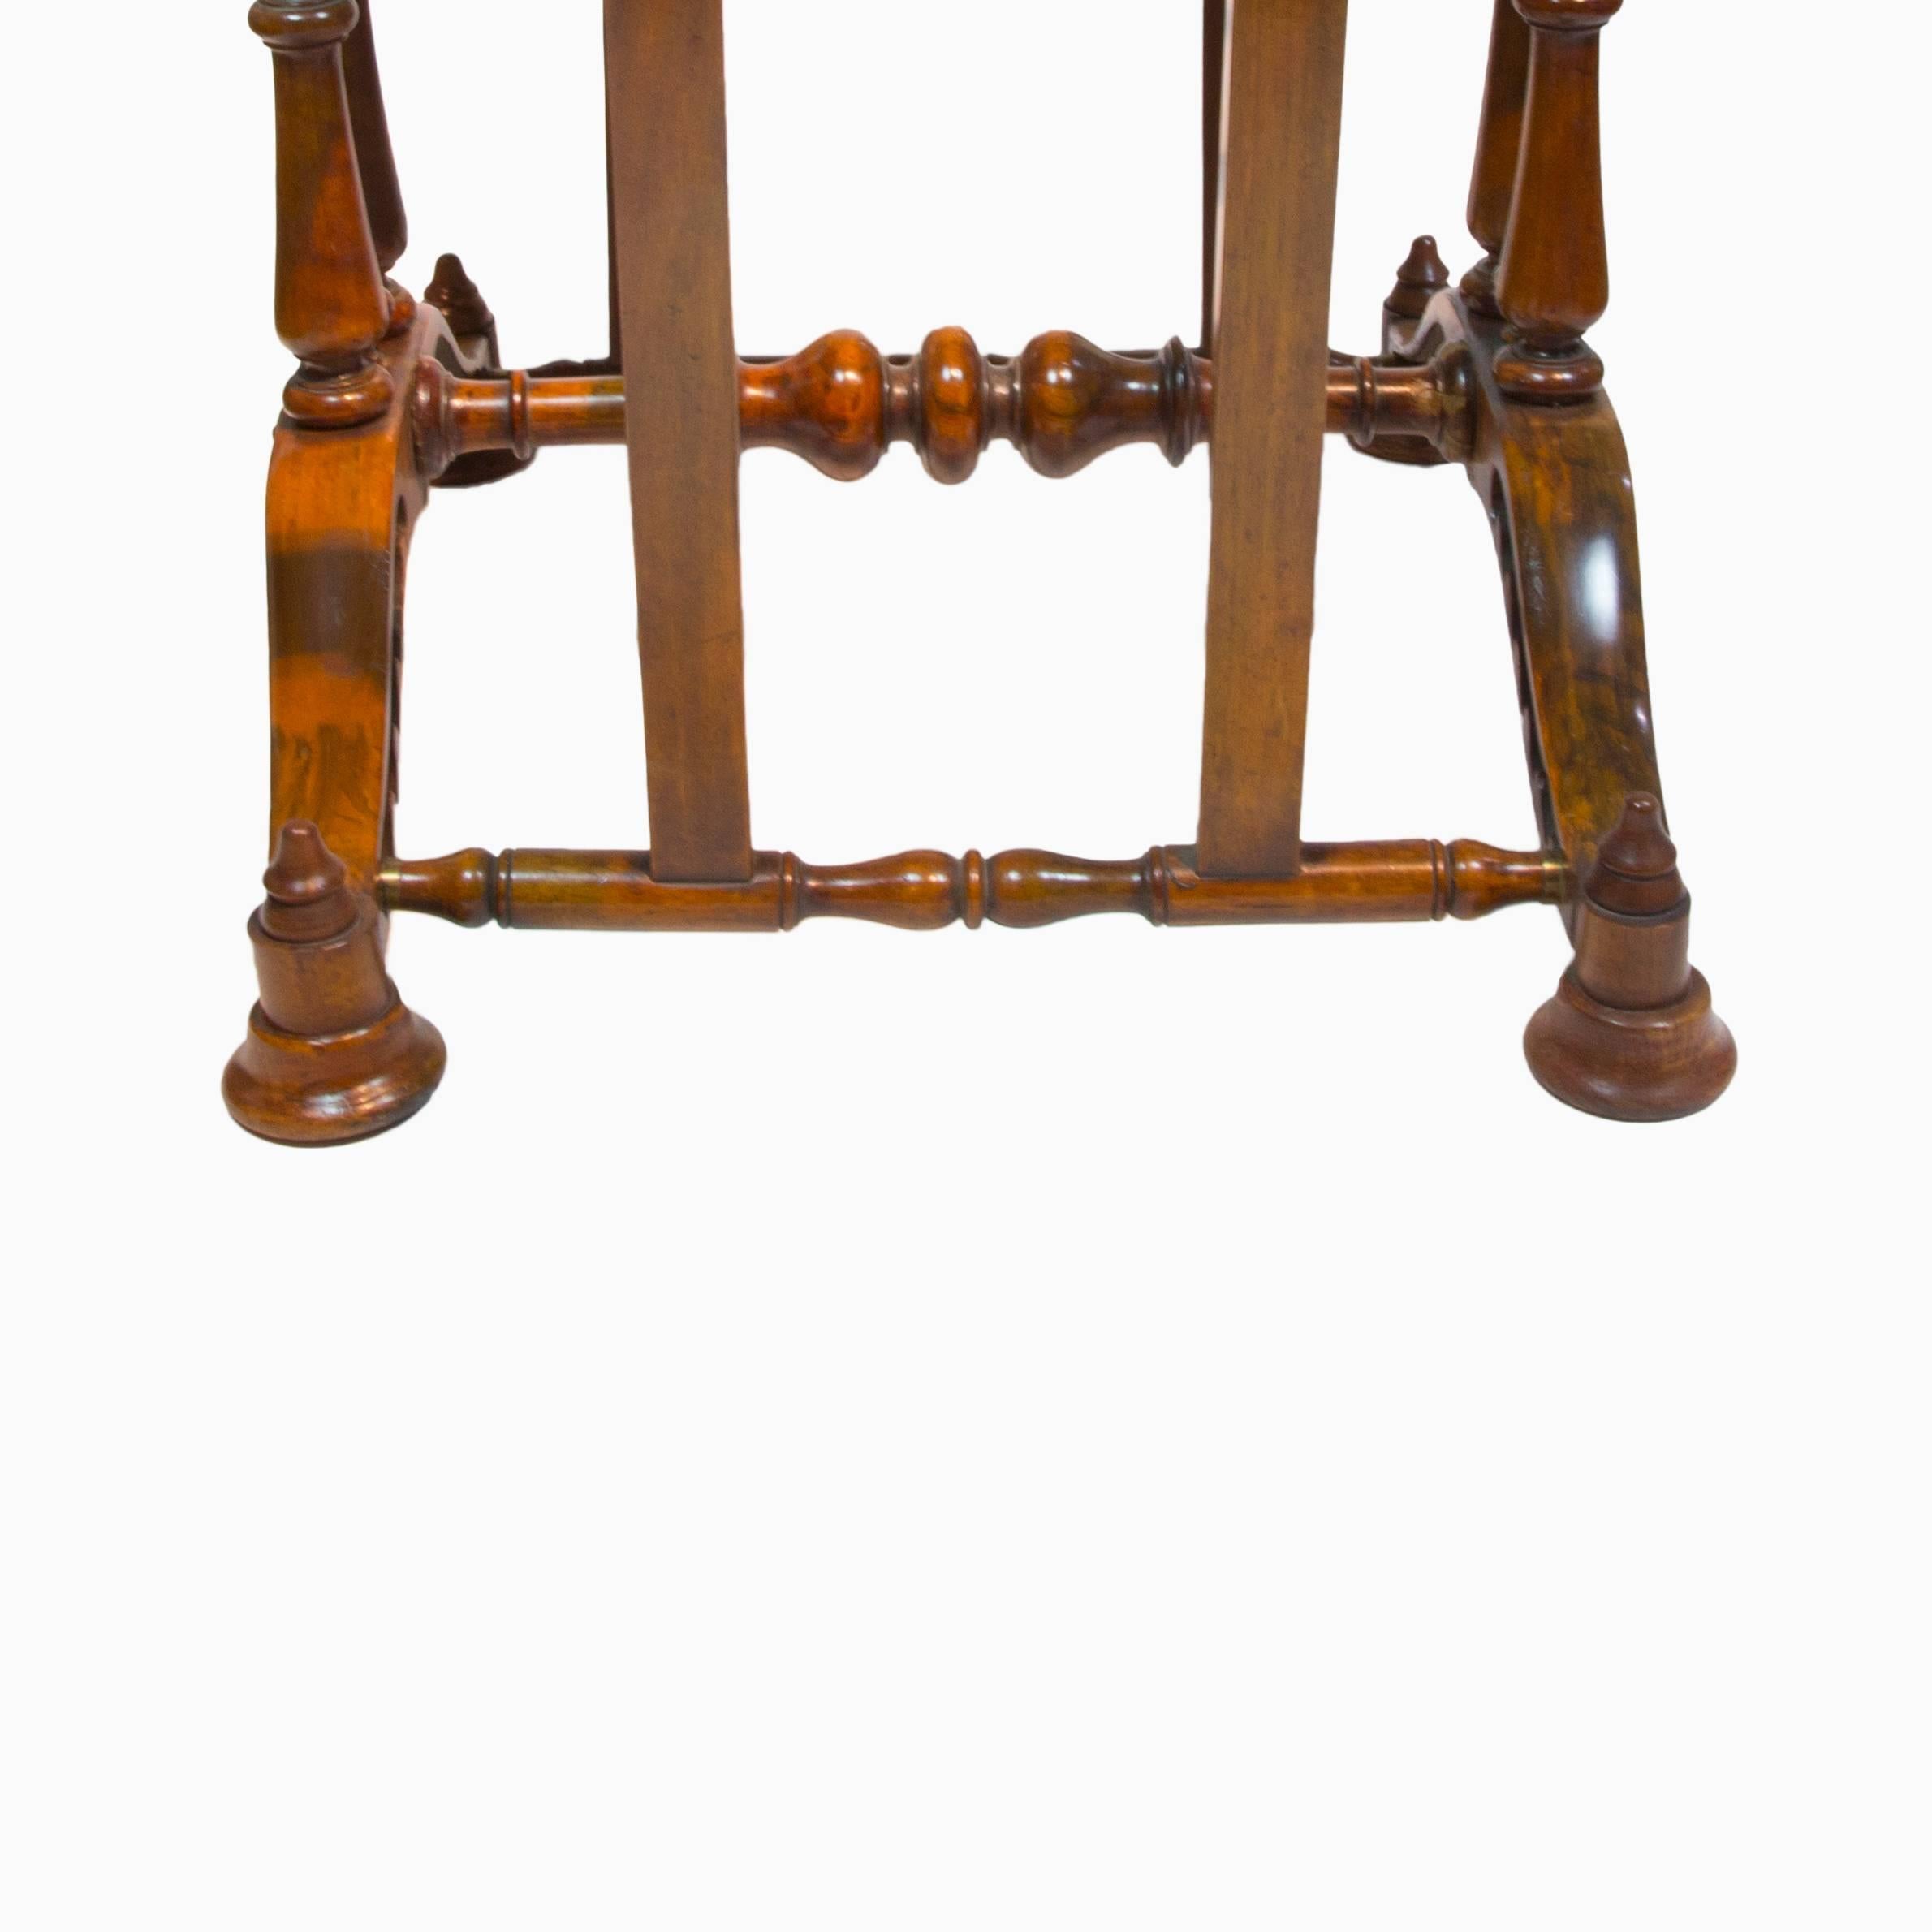 The mahogany birdcage Folio style base, centering beneath six round mahogany spindle columns and four 2’ x 4’ flat mahogany column; approximate measurements: table - 46